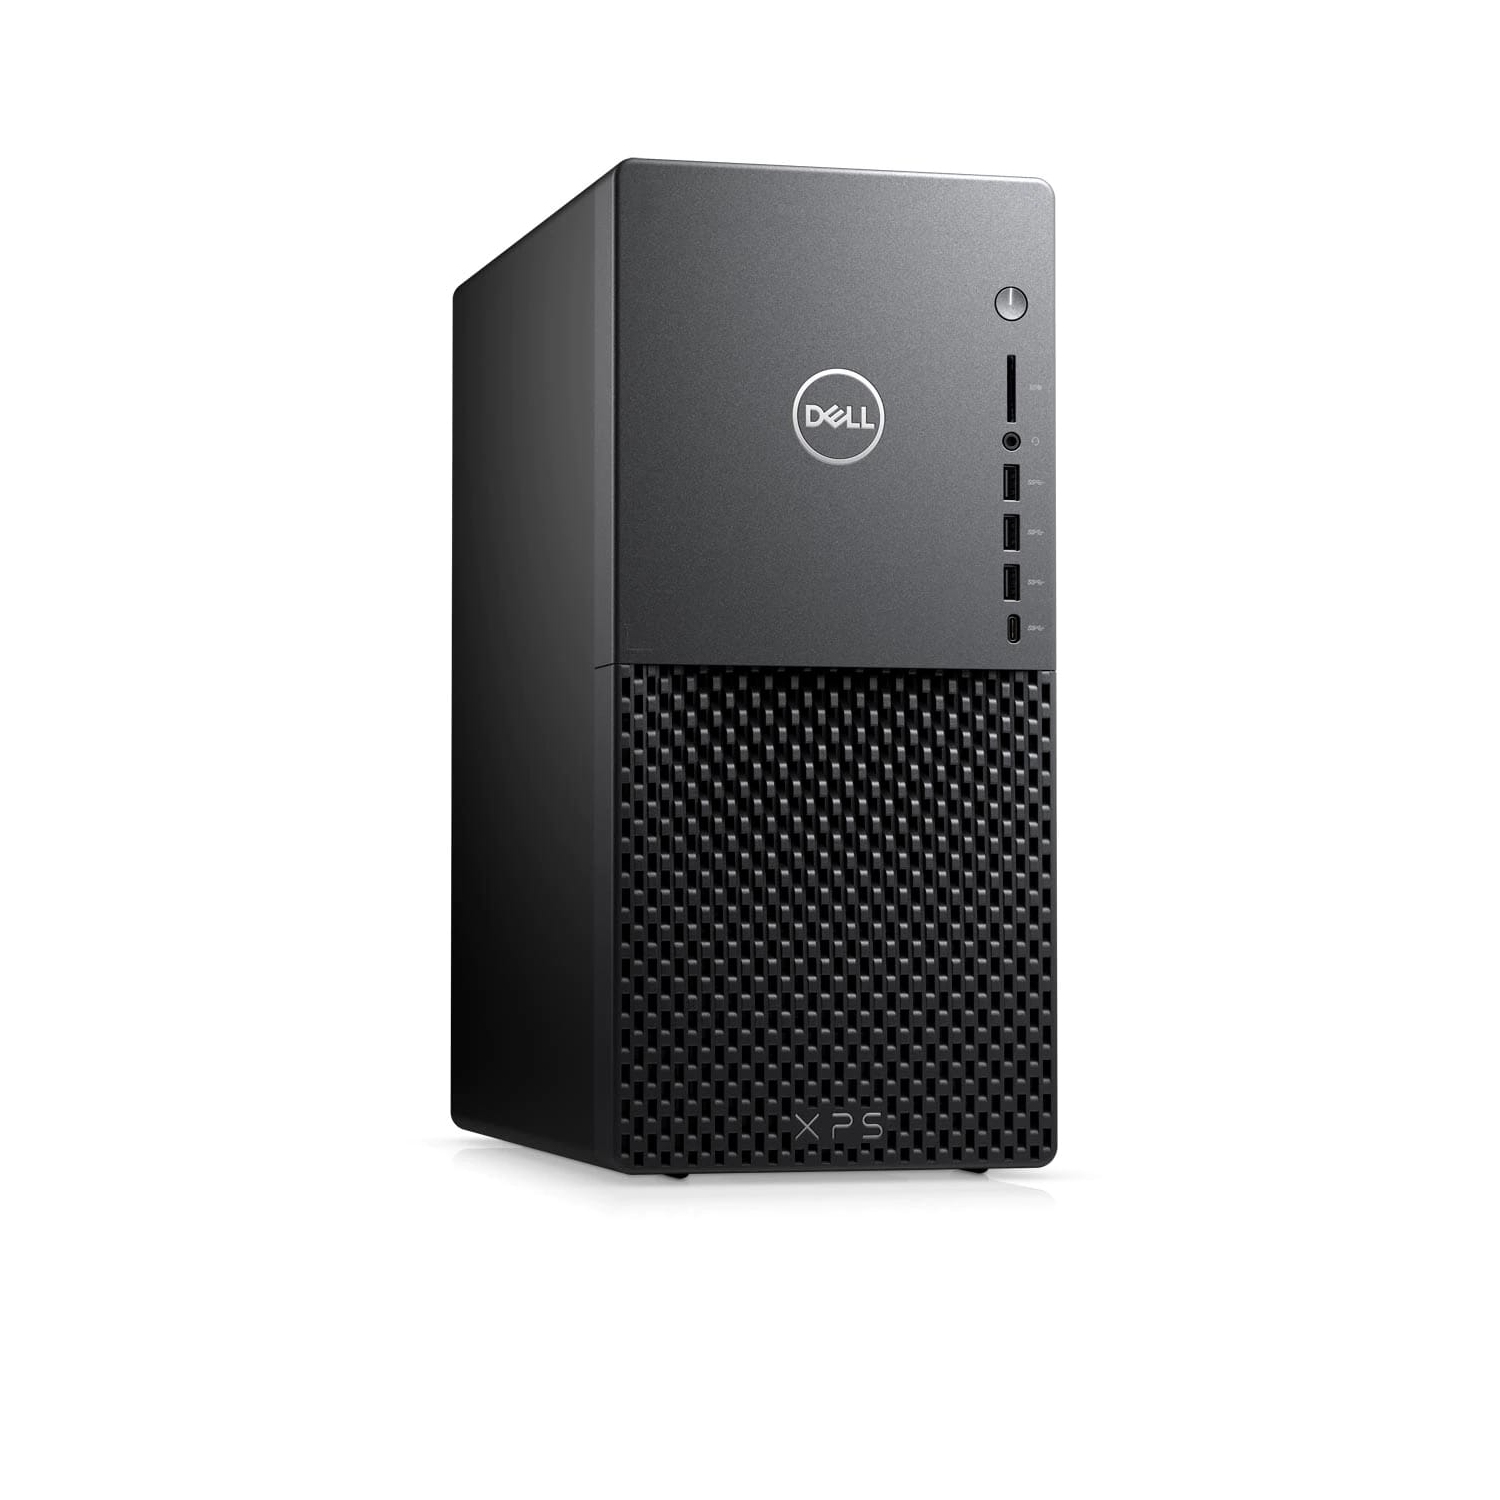 Refurbished (Excellent) - Dell XPS 8940 Desktop (2020) | Core i7 - 2TB HDD + 512GB SSD - 32GB RAM - RX 5700 | 8 Cores @ 4.9 GHz - 11th Gen CPU Certified Refurbished